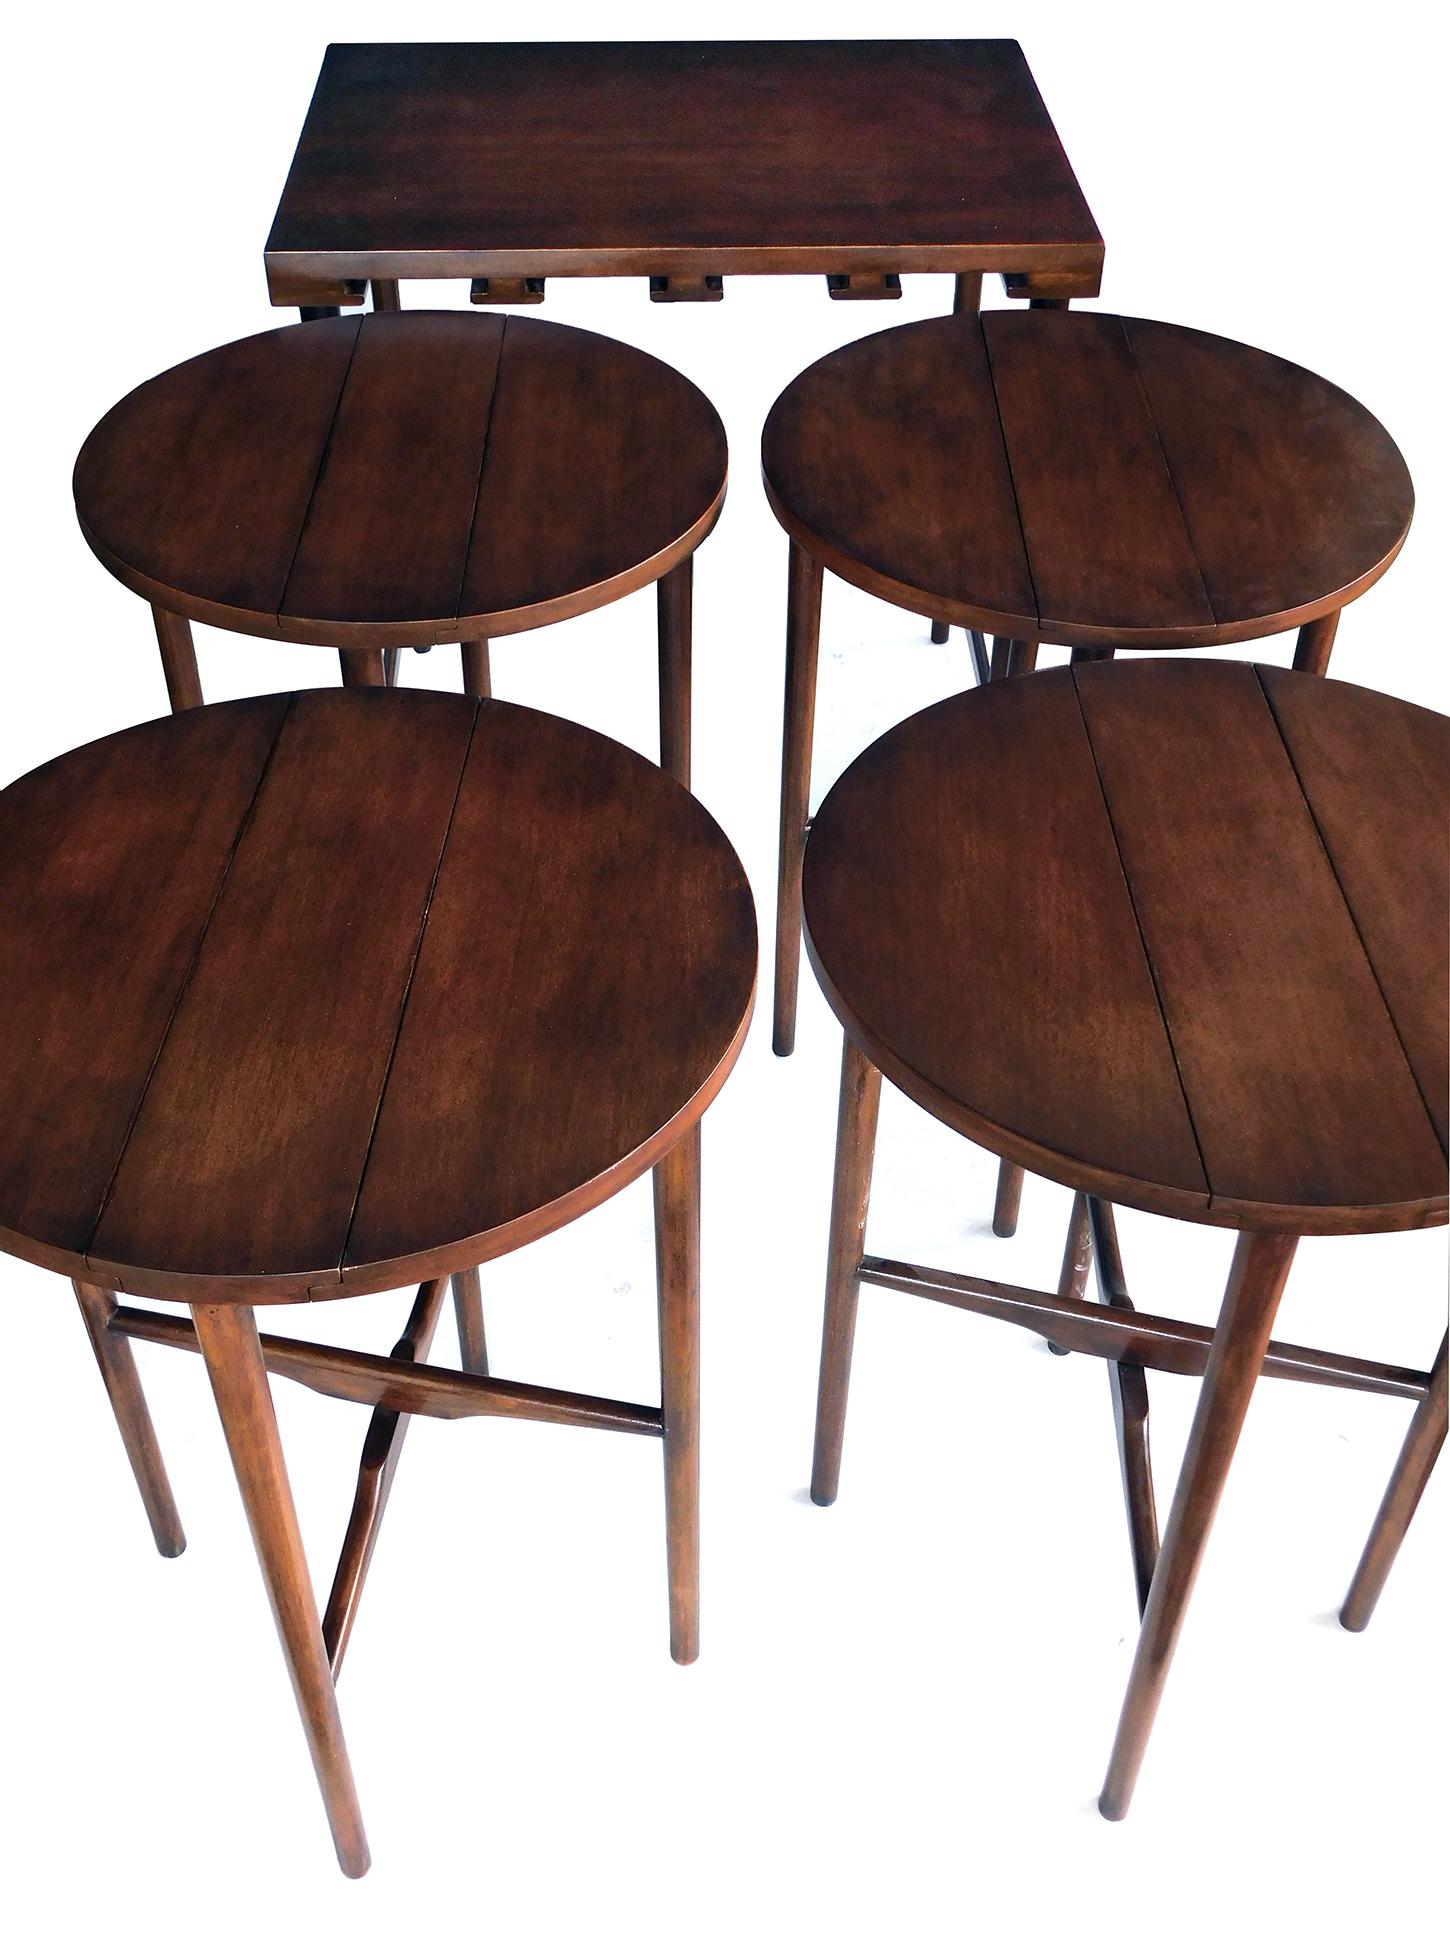 Bertha Schaefer for M. Singer & Sons 1950s Walnut Nesting Tables In Good Condition For Sale In San Francisco, CA